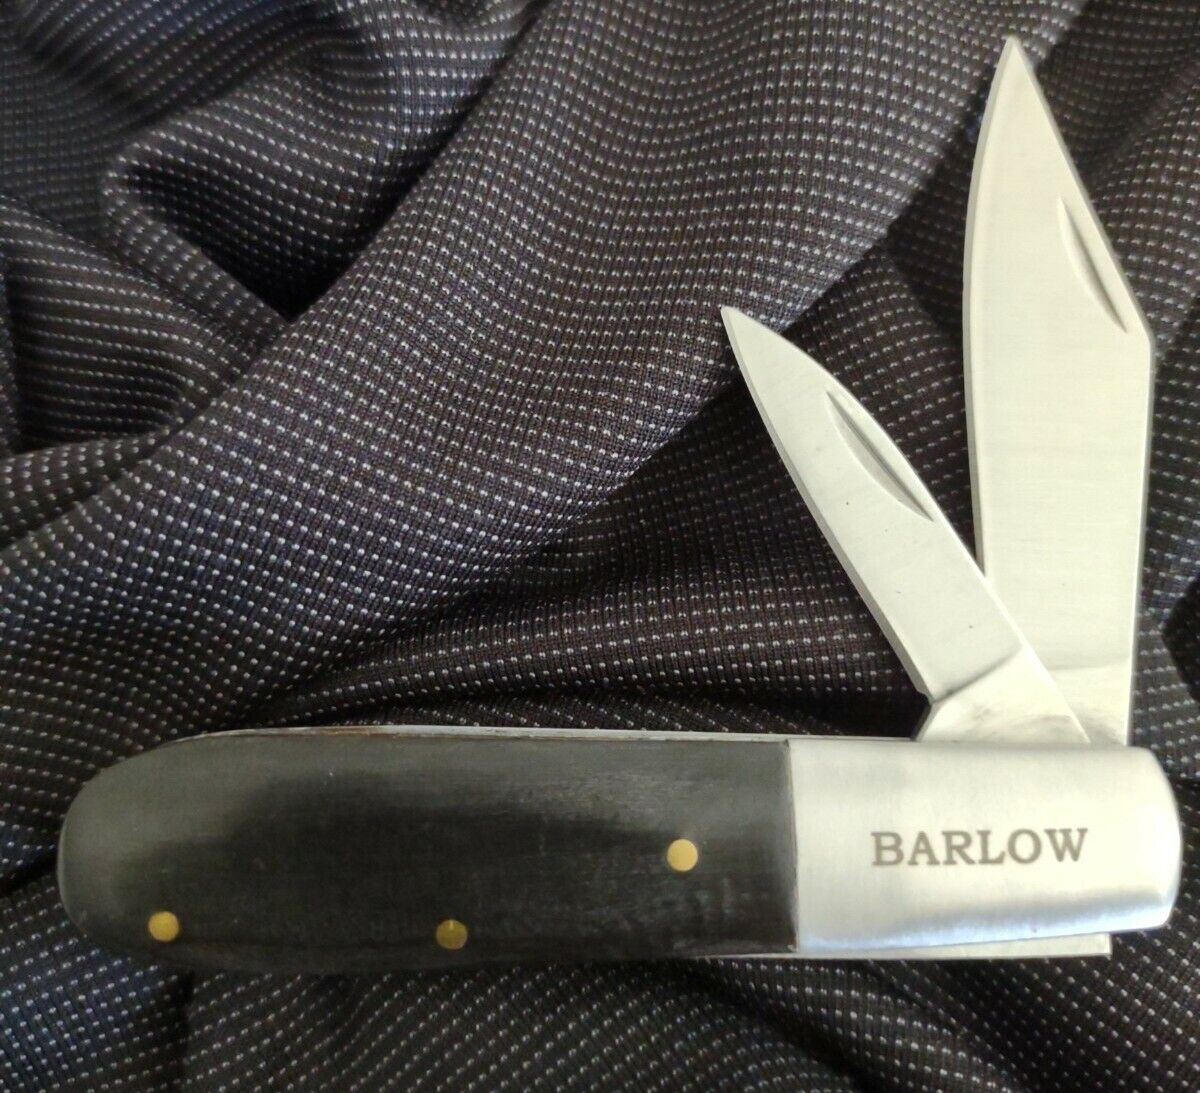 Black and Stainless Steel Classic Barlow Pocket Knife - Free Same Day Shipping